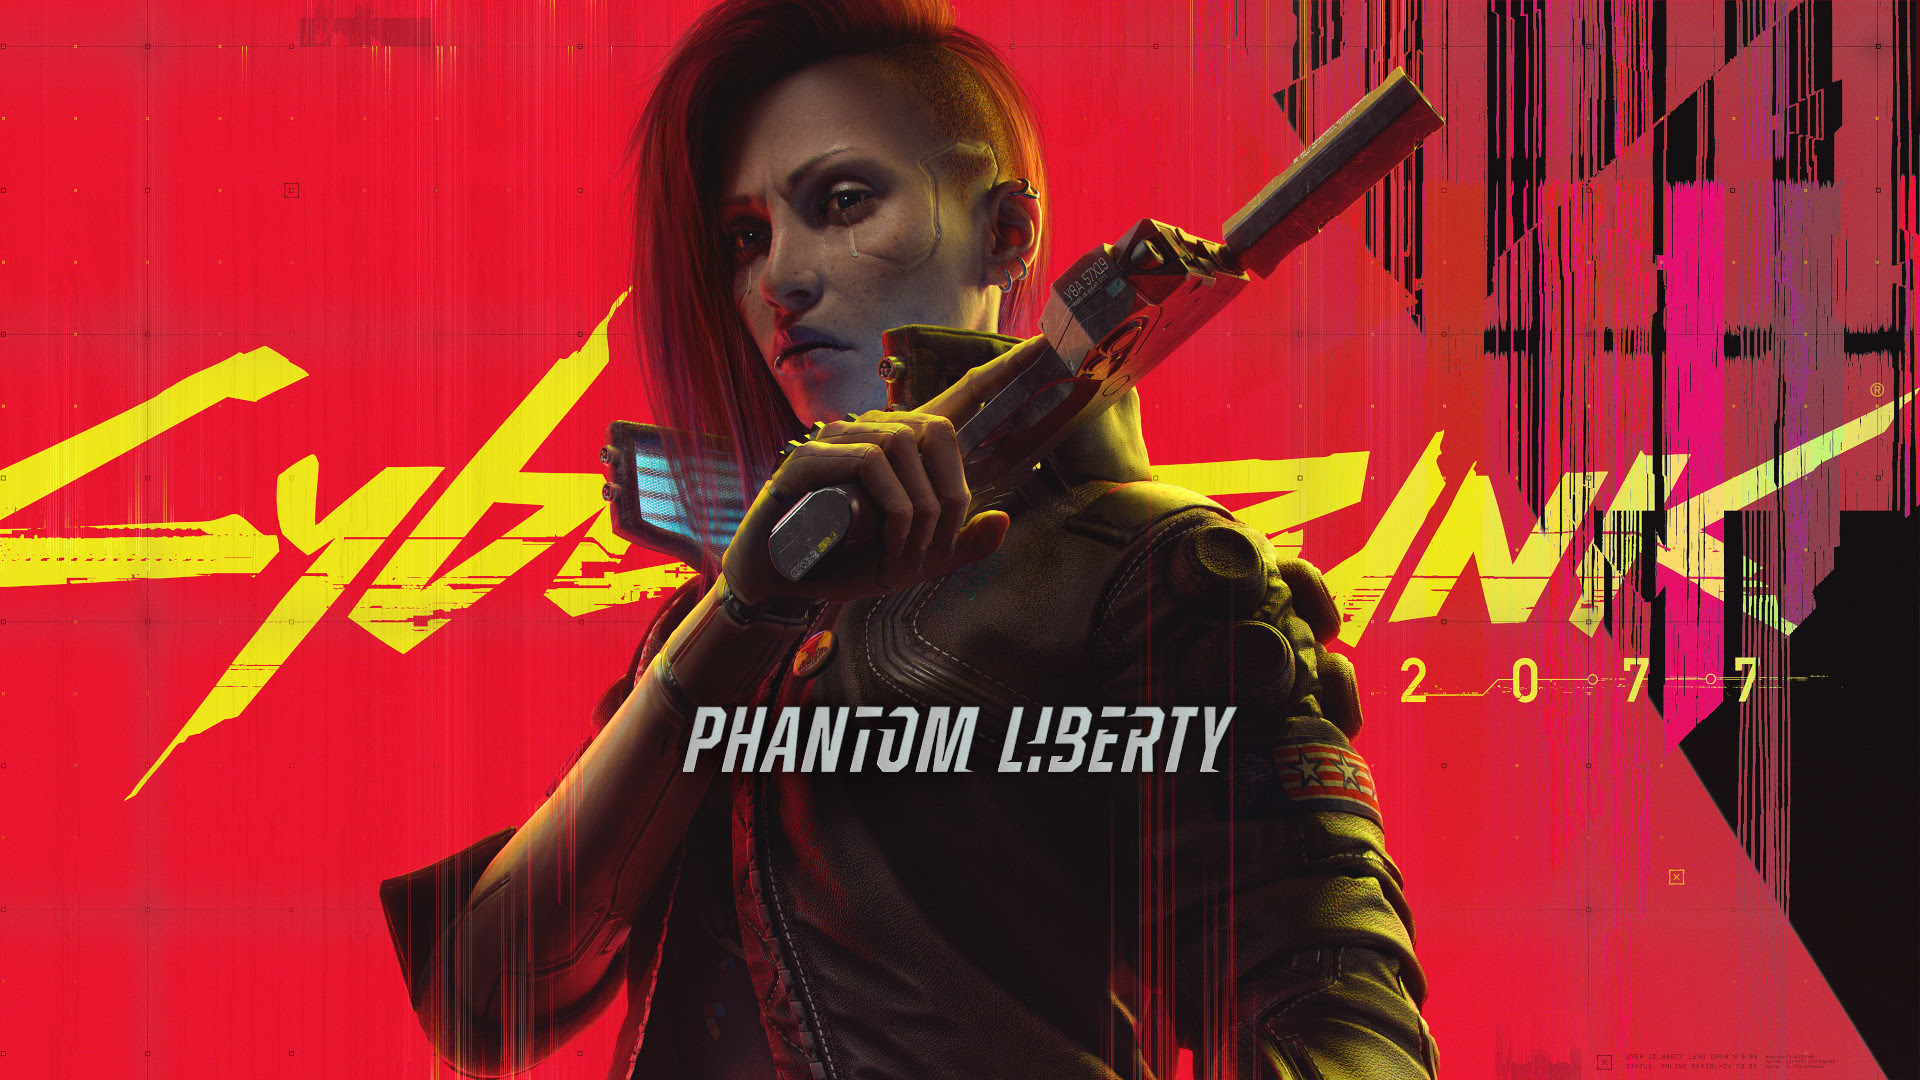 Take a deep dive with developers into the Official Cyberpunk 2077: Phantom Liberty Trailer